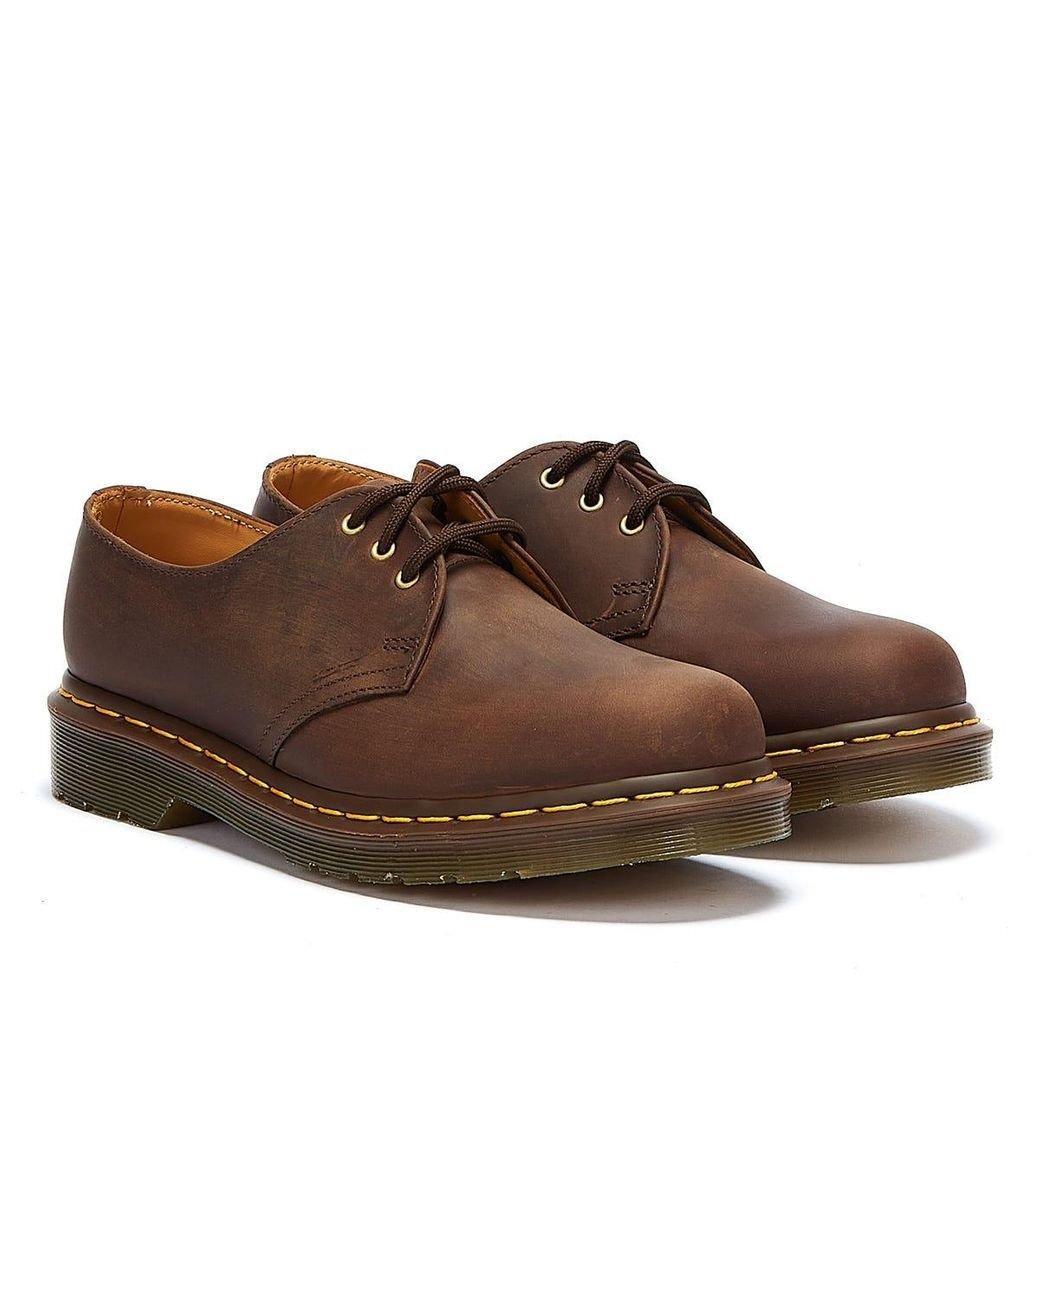 Dr. Martens 1461 Smooth Shoes Classic 3 Eye Lace Up Unisex - Dark Brown - UK 9